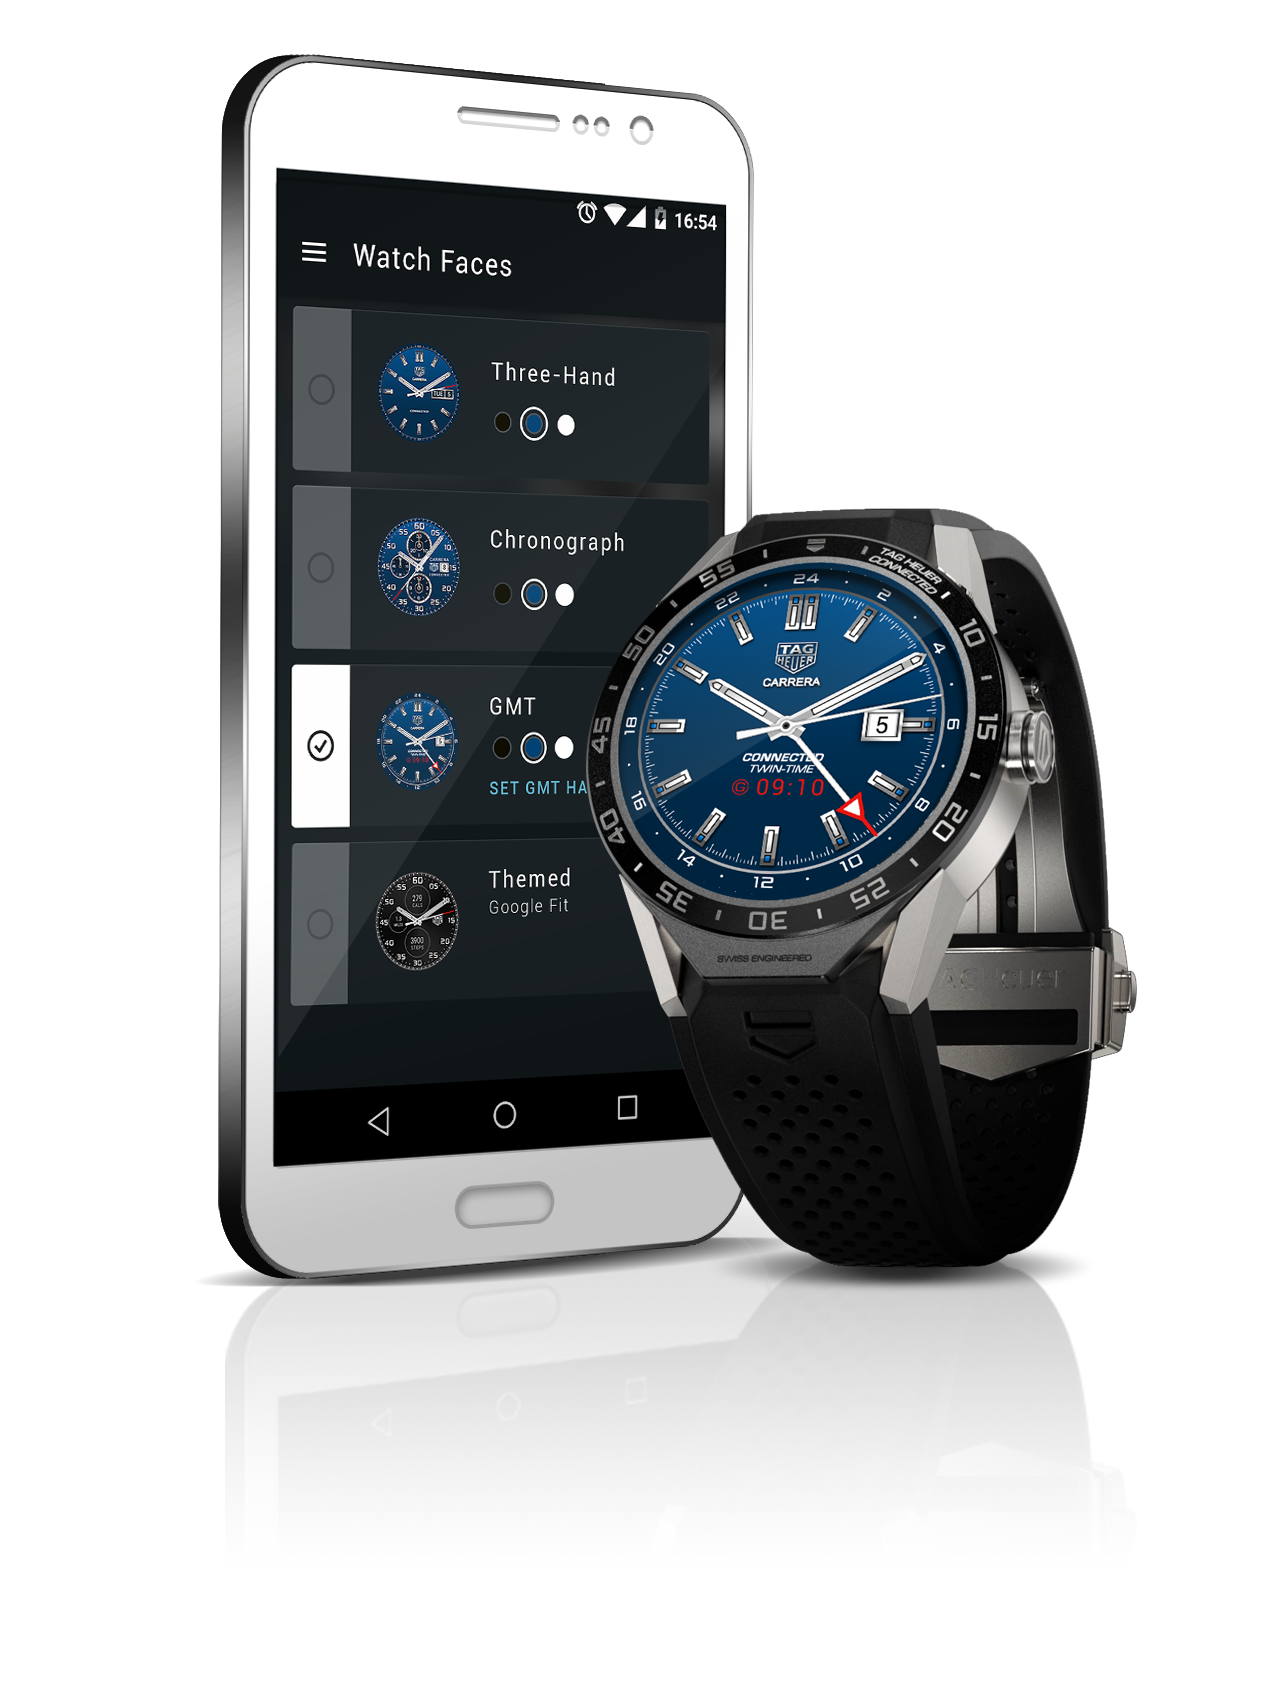 Tag and Intel Android SmartWatch: Sign of the Times